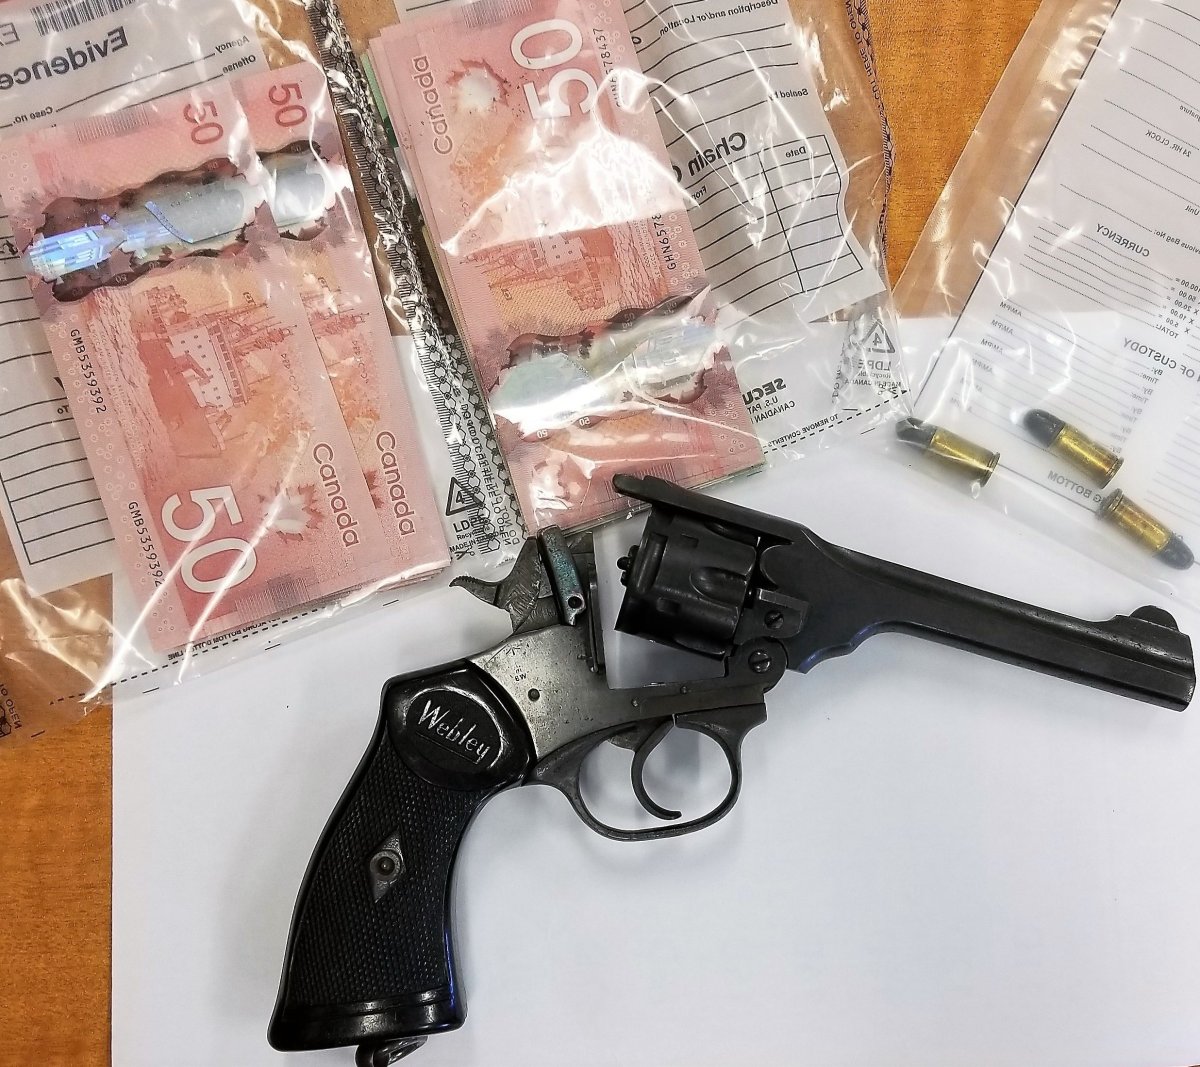 City of Kawartha Lakes OPP charged two men after seizing a firearm and money.